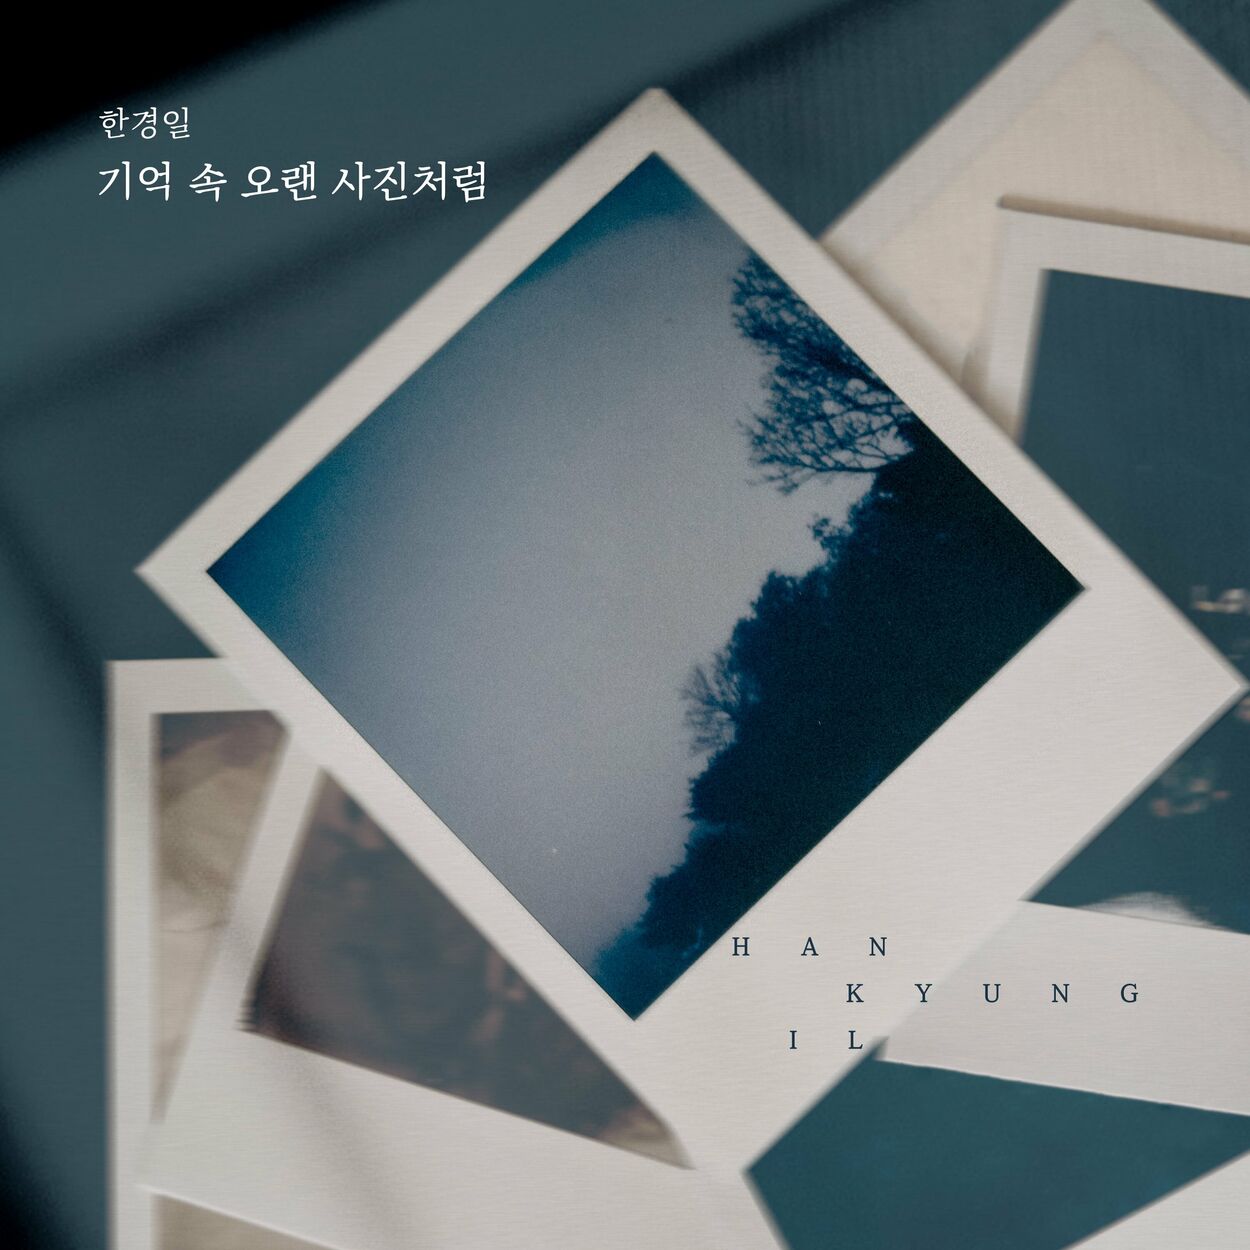 Han Kyung Il – Like an old photo in my memory – Single